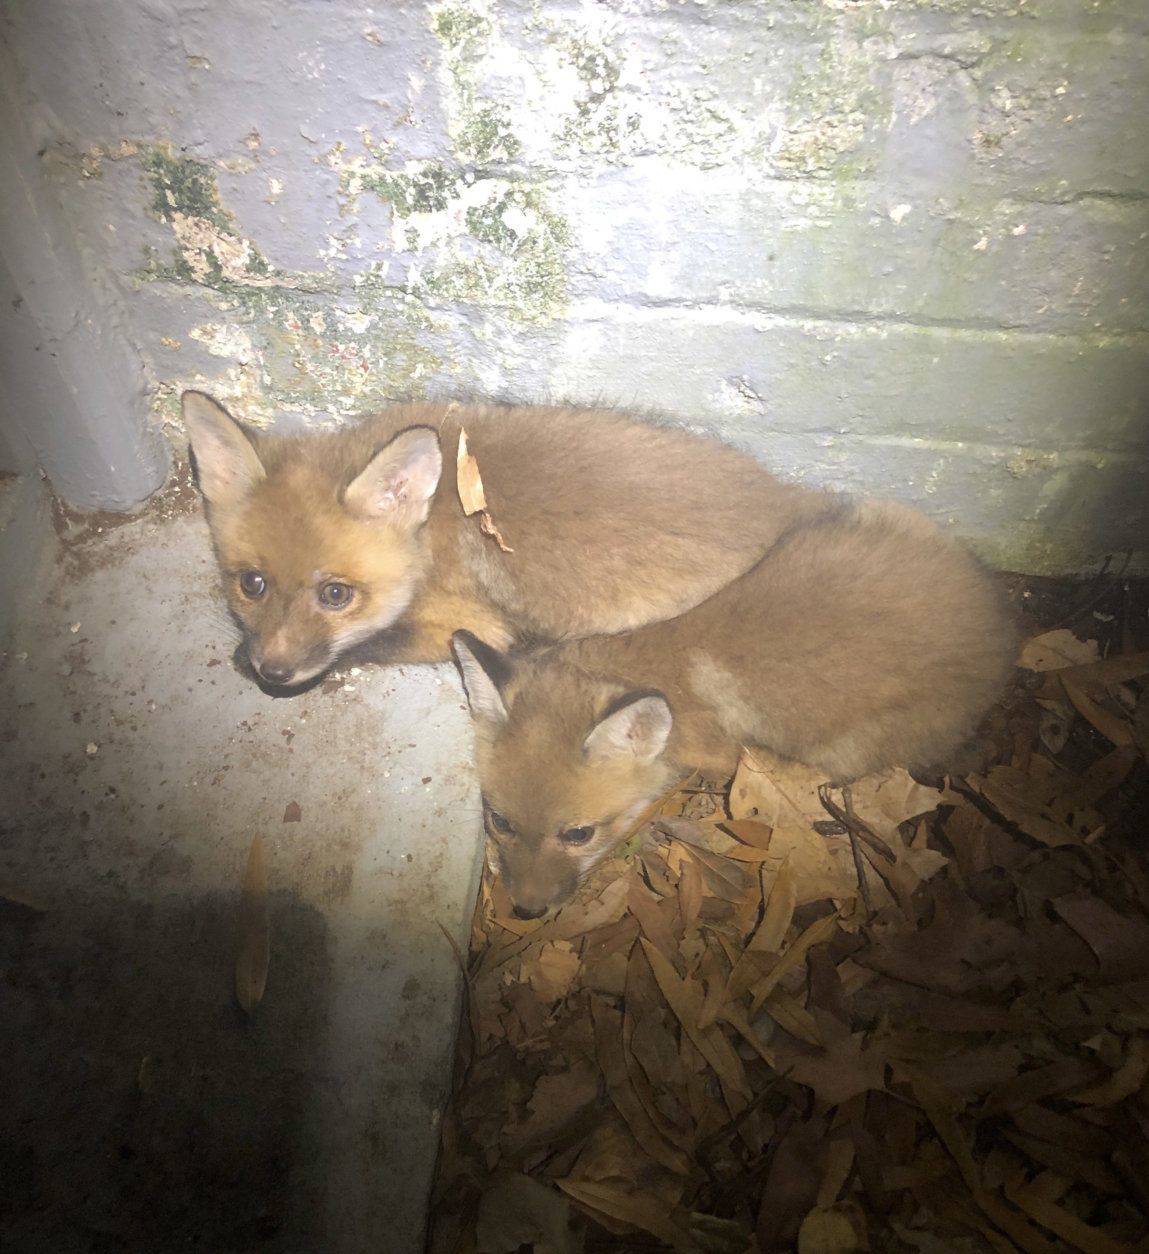 The Humane Rescue Alliance got a call about two fox babies, known as kits, who were stuck in a basement window well in Northwest, and “they weren’t making it out,” Dan D’Eramo, the director of field services, told WTOP. (Courtesy Humane Rescue Alliance)